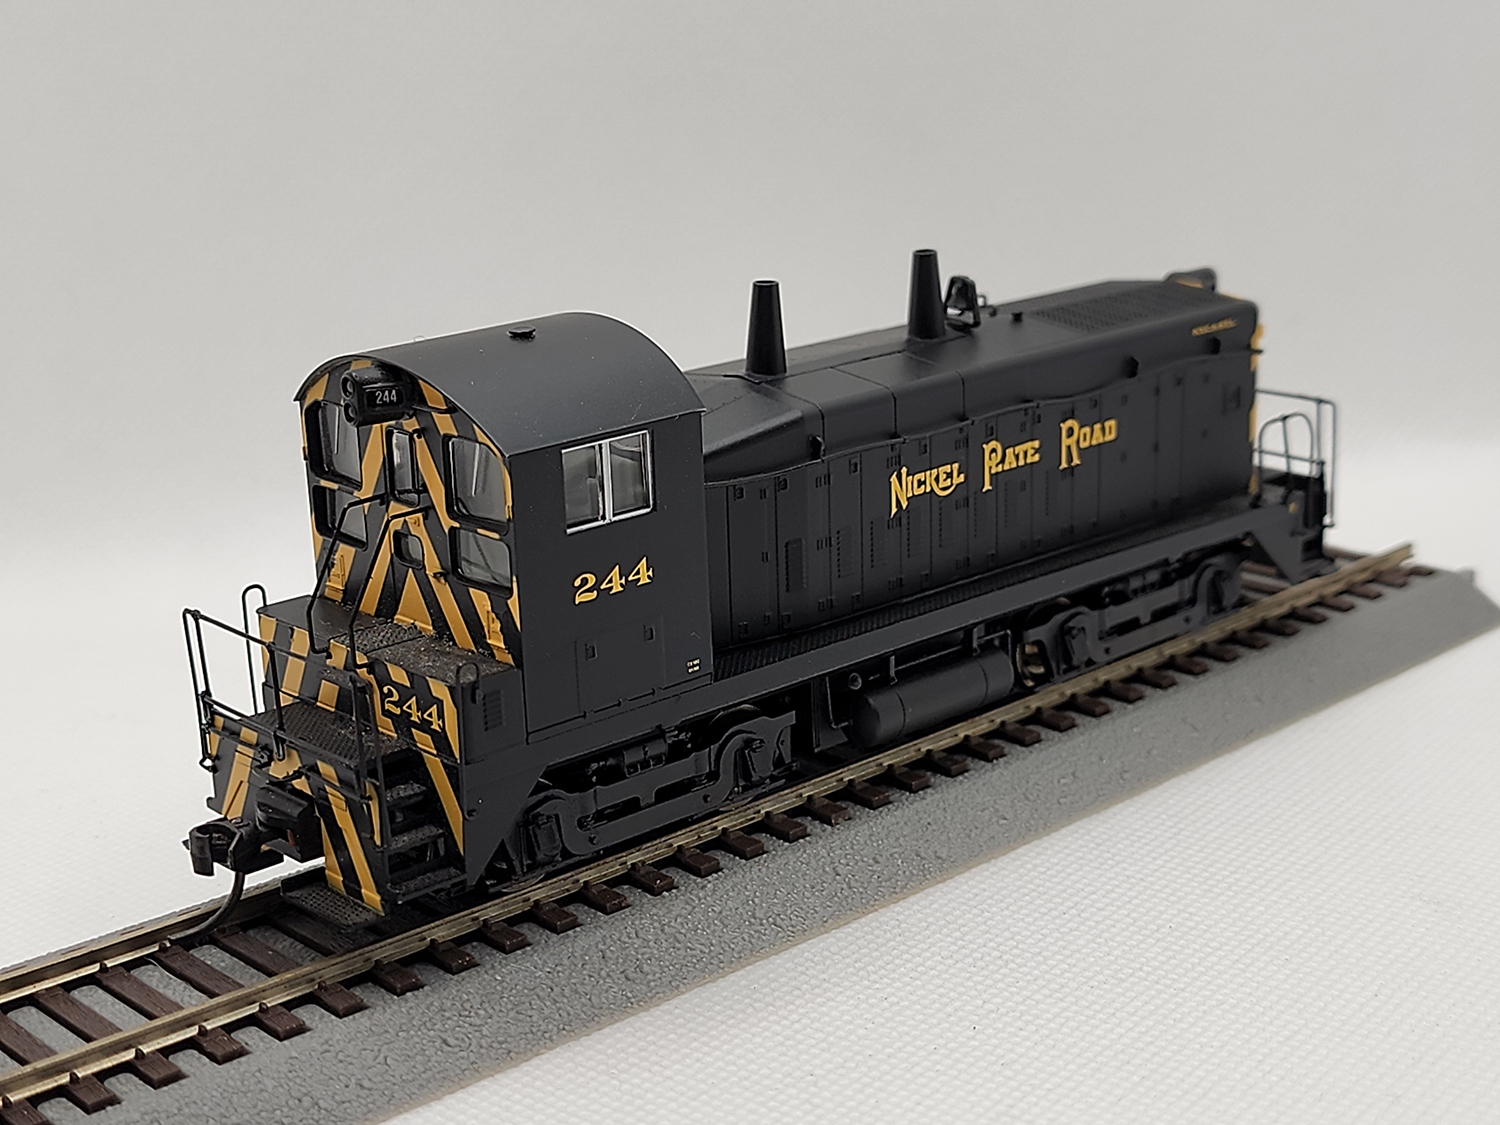 3rd view of the Life-Like Nickel Plate Road SW9 Diesel Locomotive #244 in my HO-scale Collection